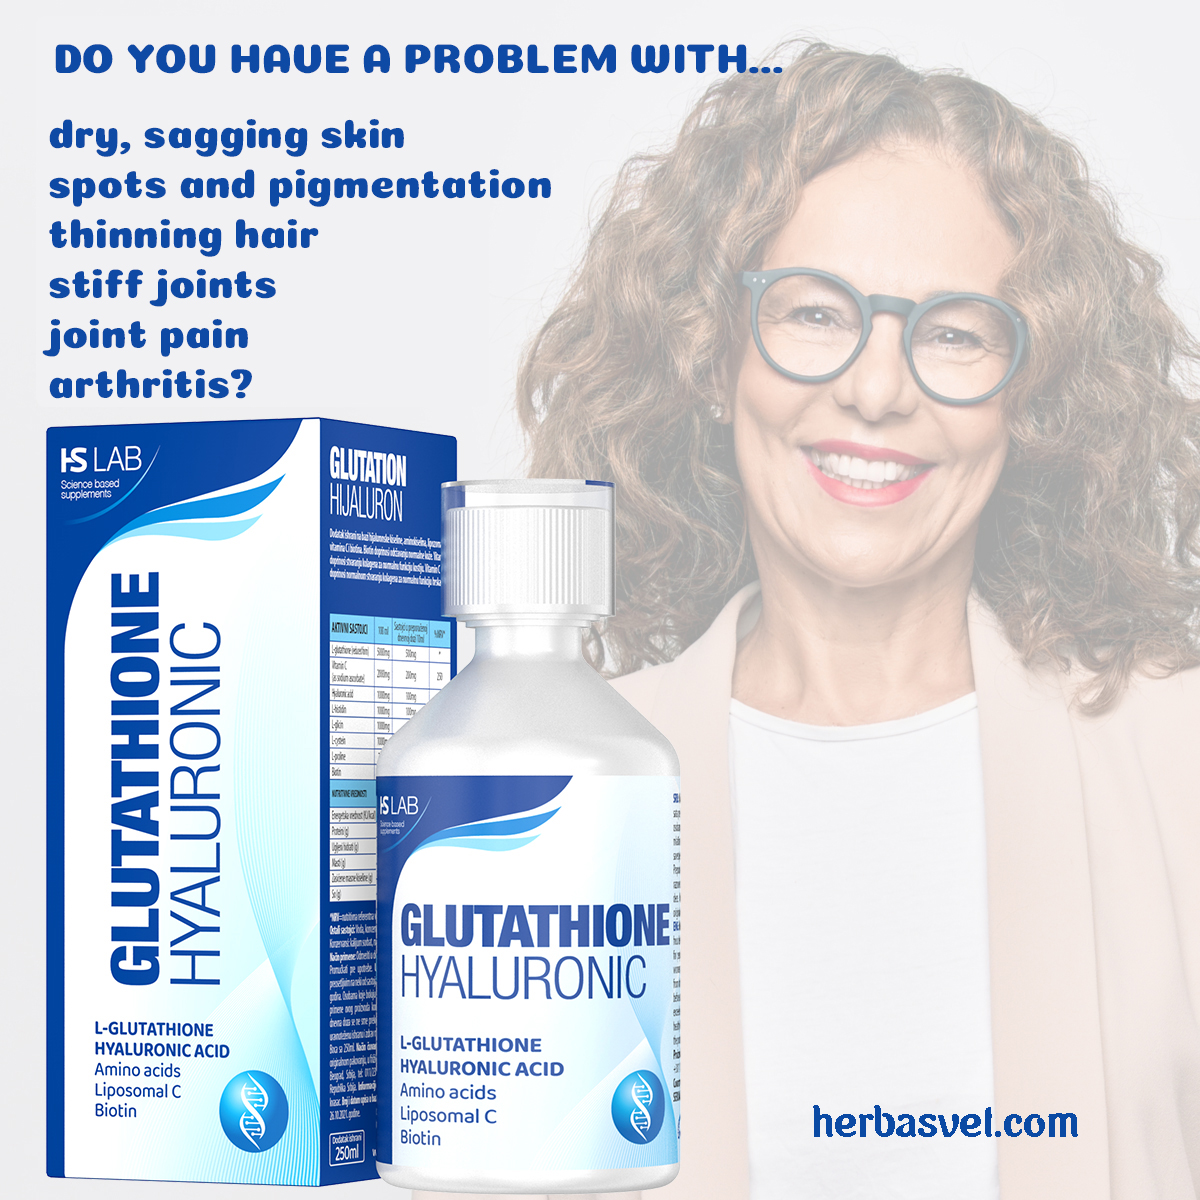 Glutathione Hyaluronic contains hyaluronic acid